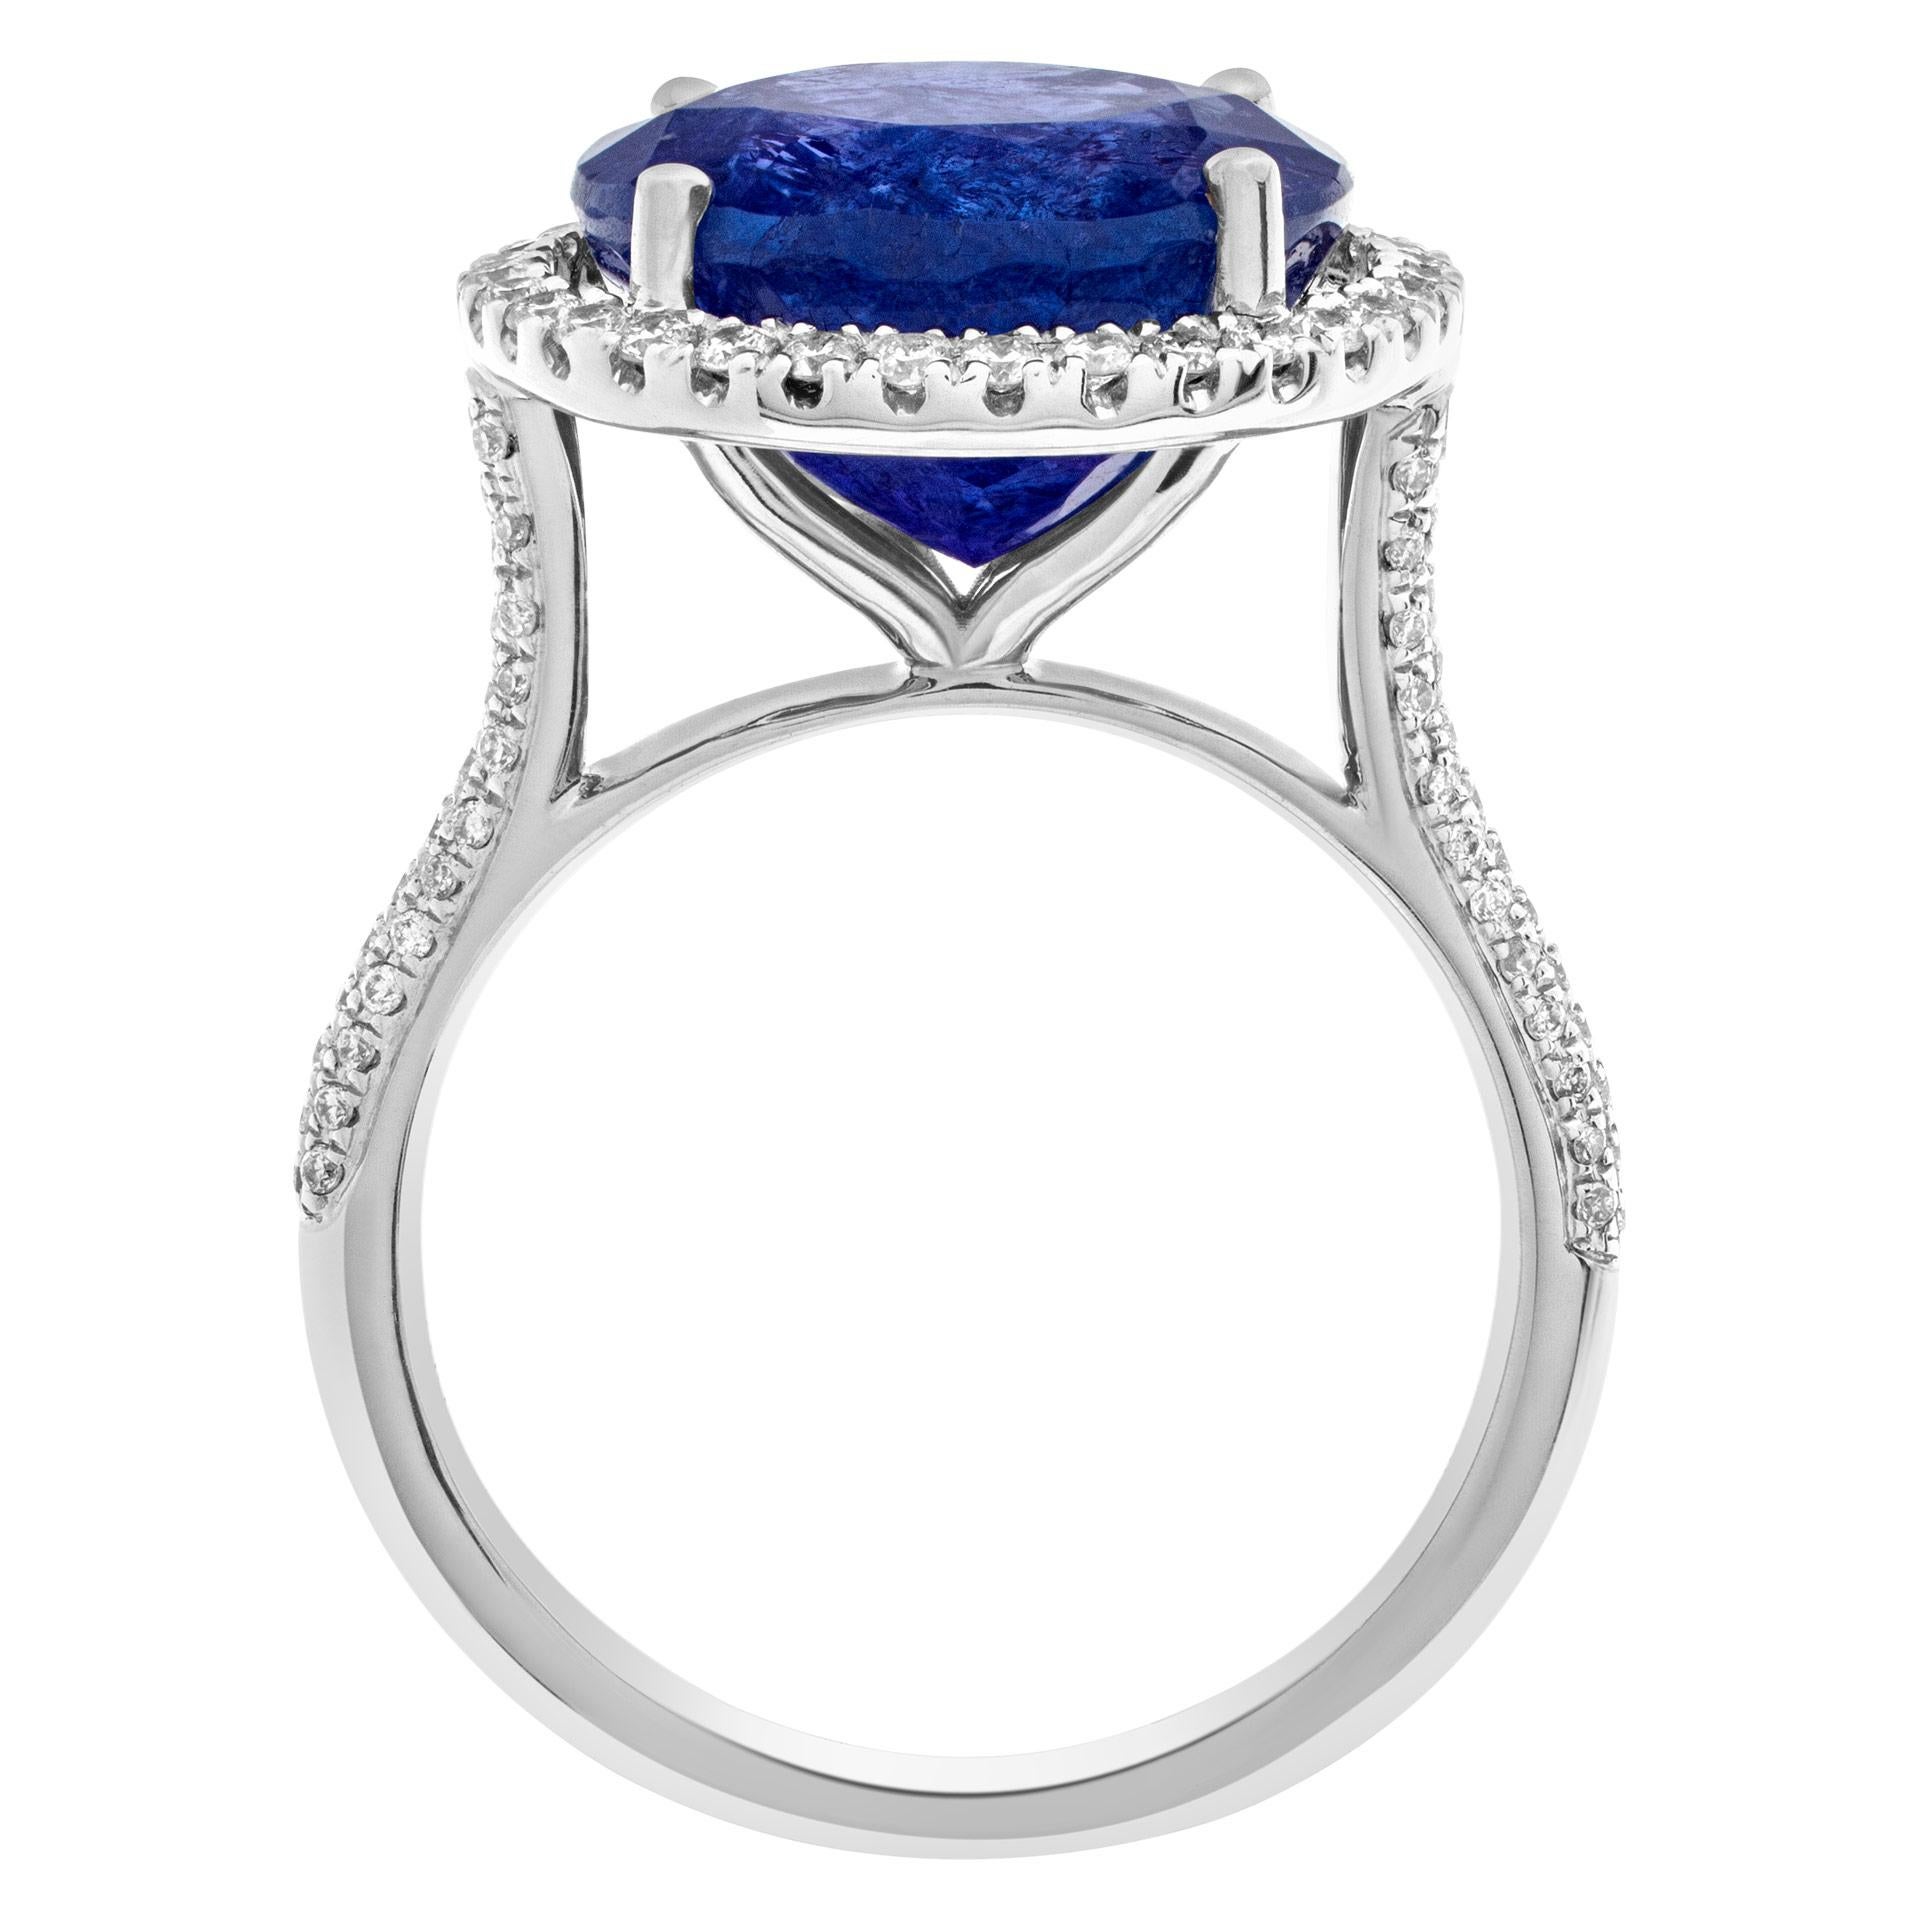 Tanzanite and diamond ring in 18k white gold In Excellent Condition For Sale In Surfside, FL